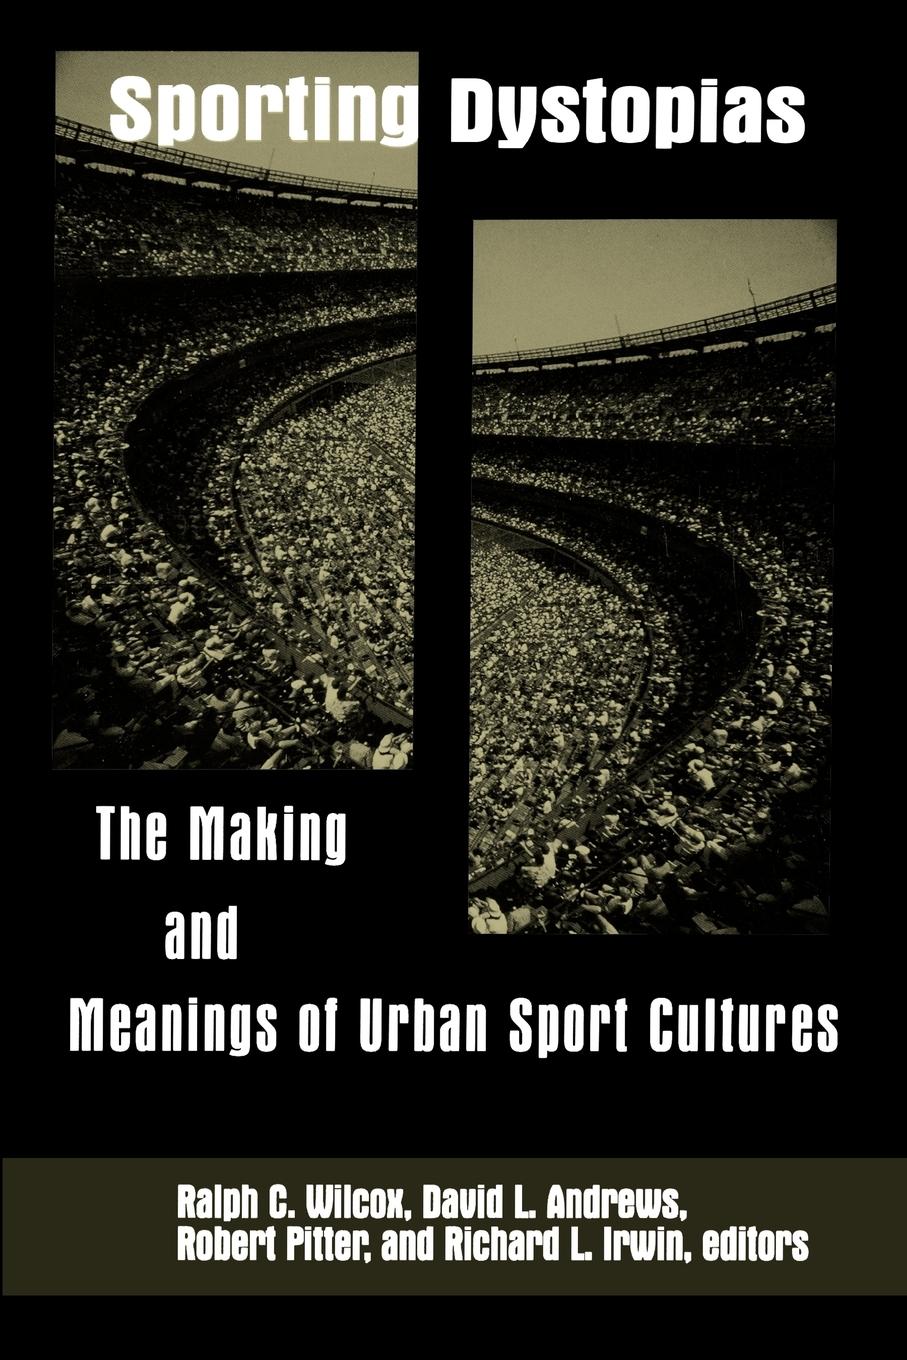 Sporting Dystopias: The Making and Meaning of Urban Sport Cultures - Wilcox, Ralph C.